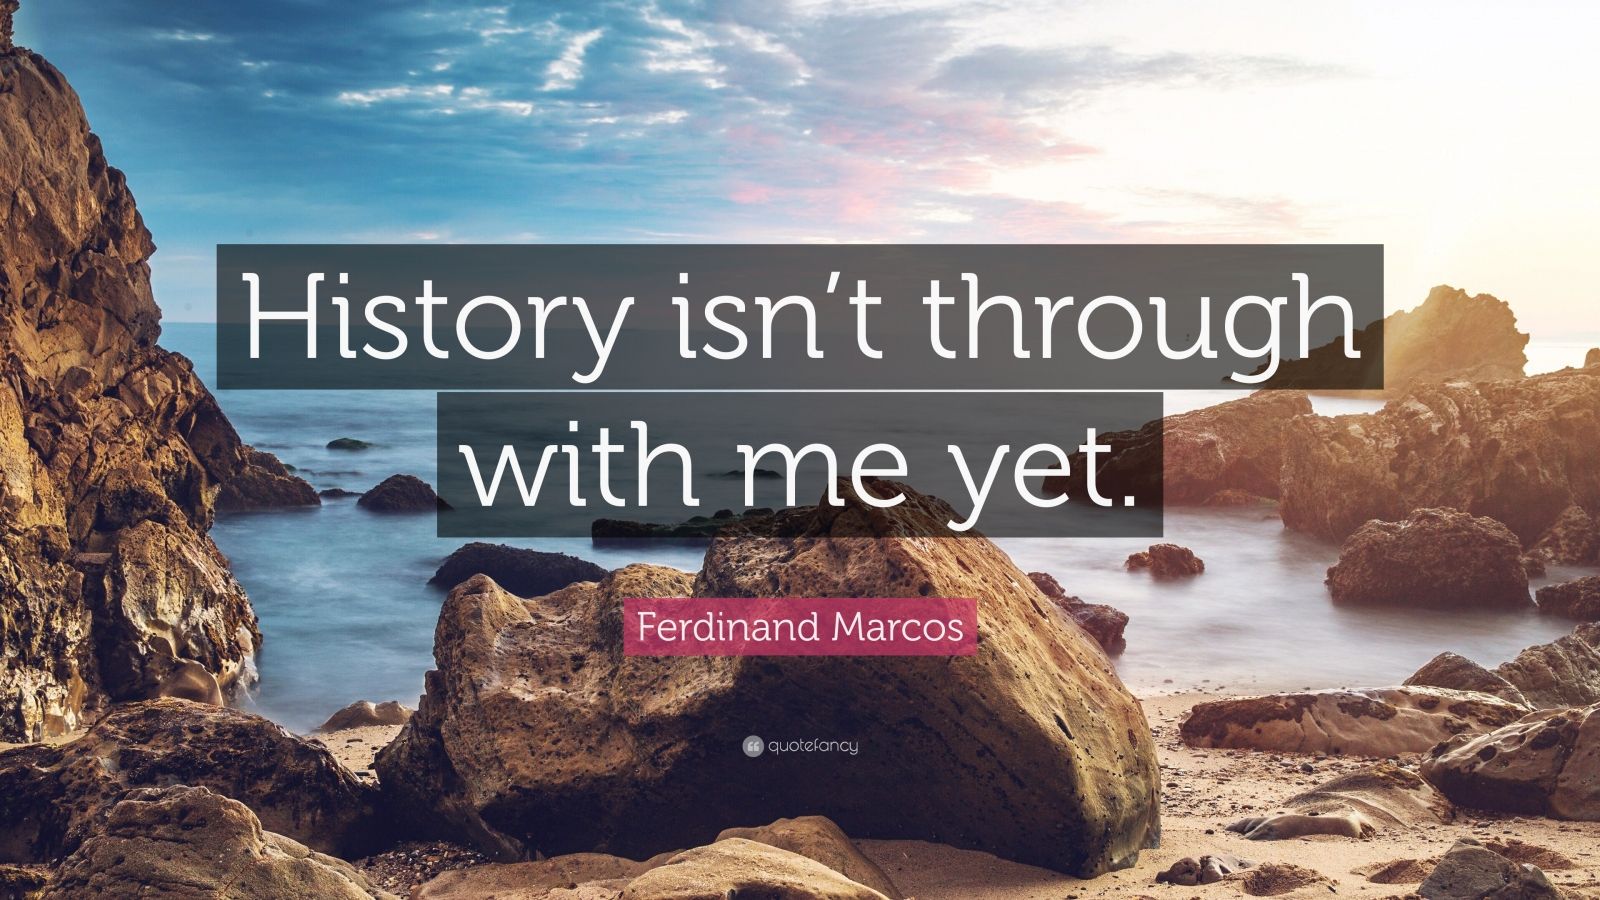 Ferdinand Marcos Quote: “History isn’t through with me yet.” (10